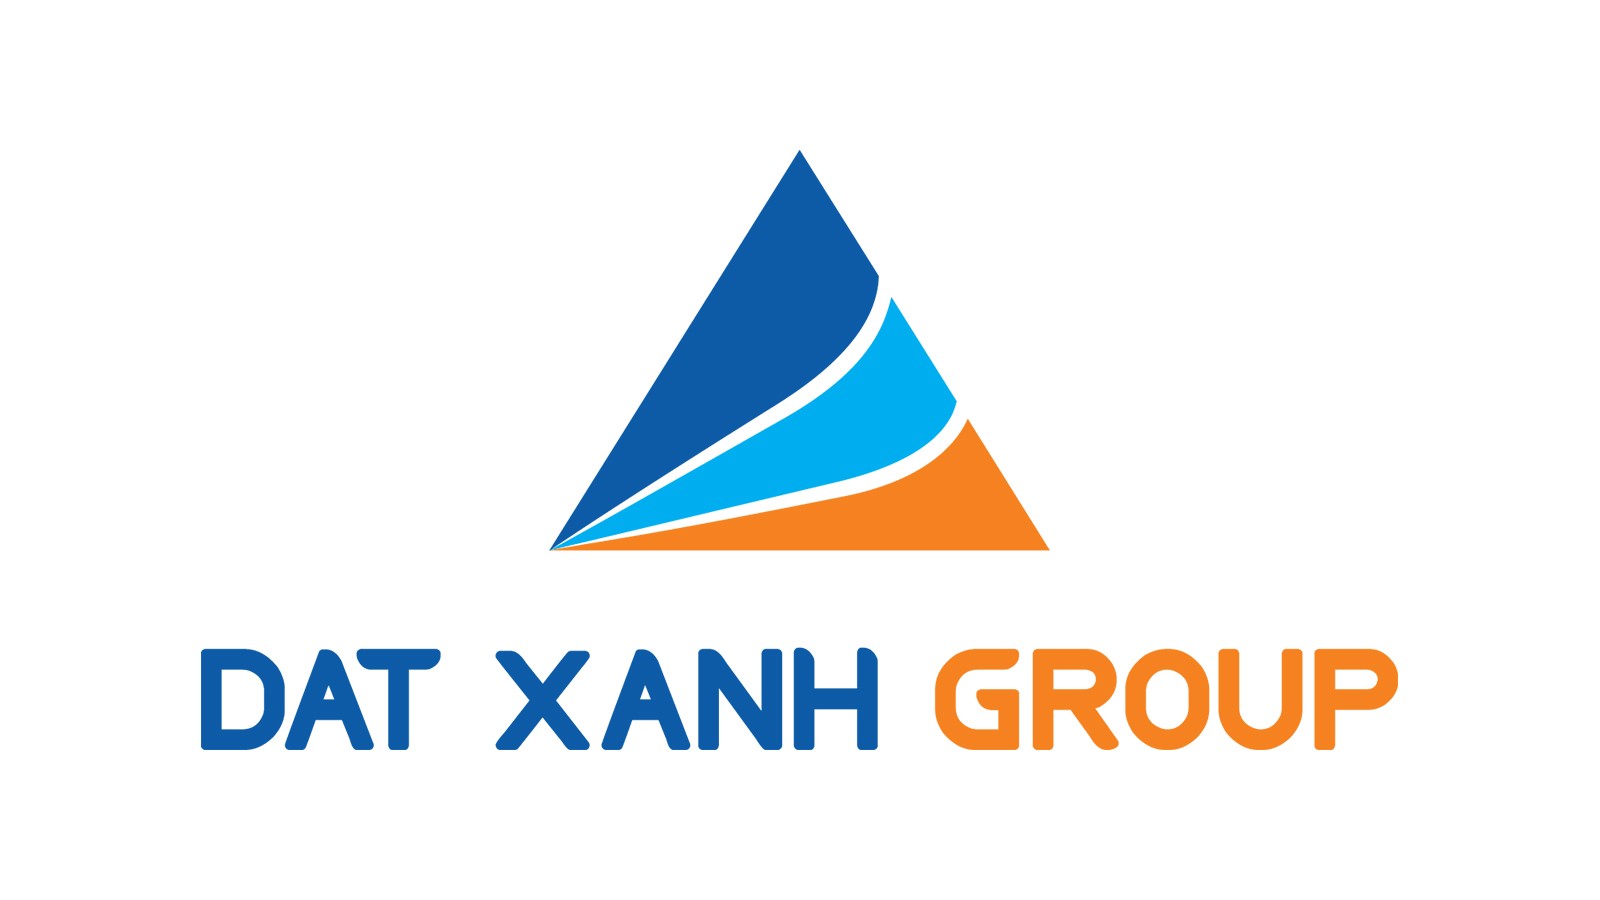 DAT XANH GROUP